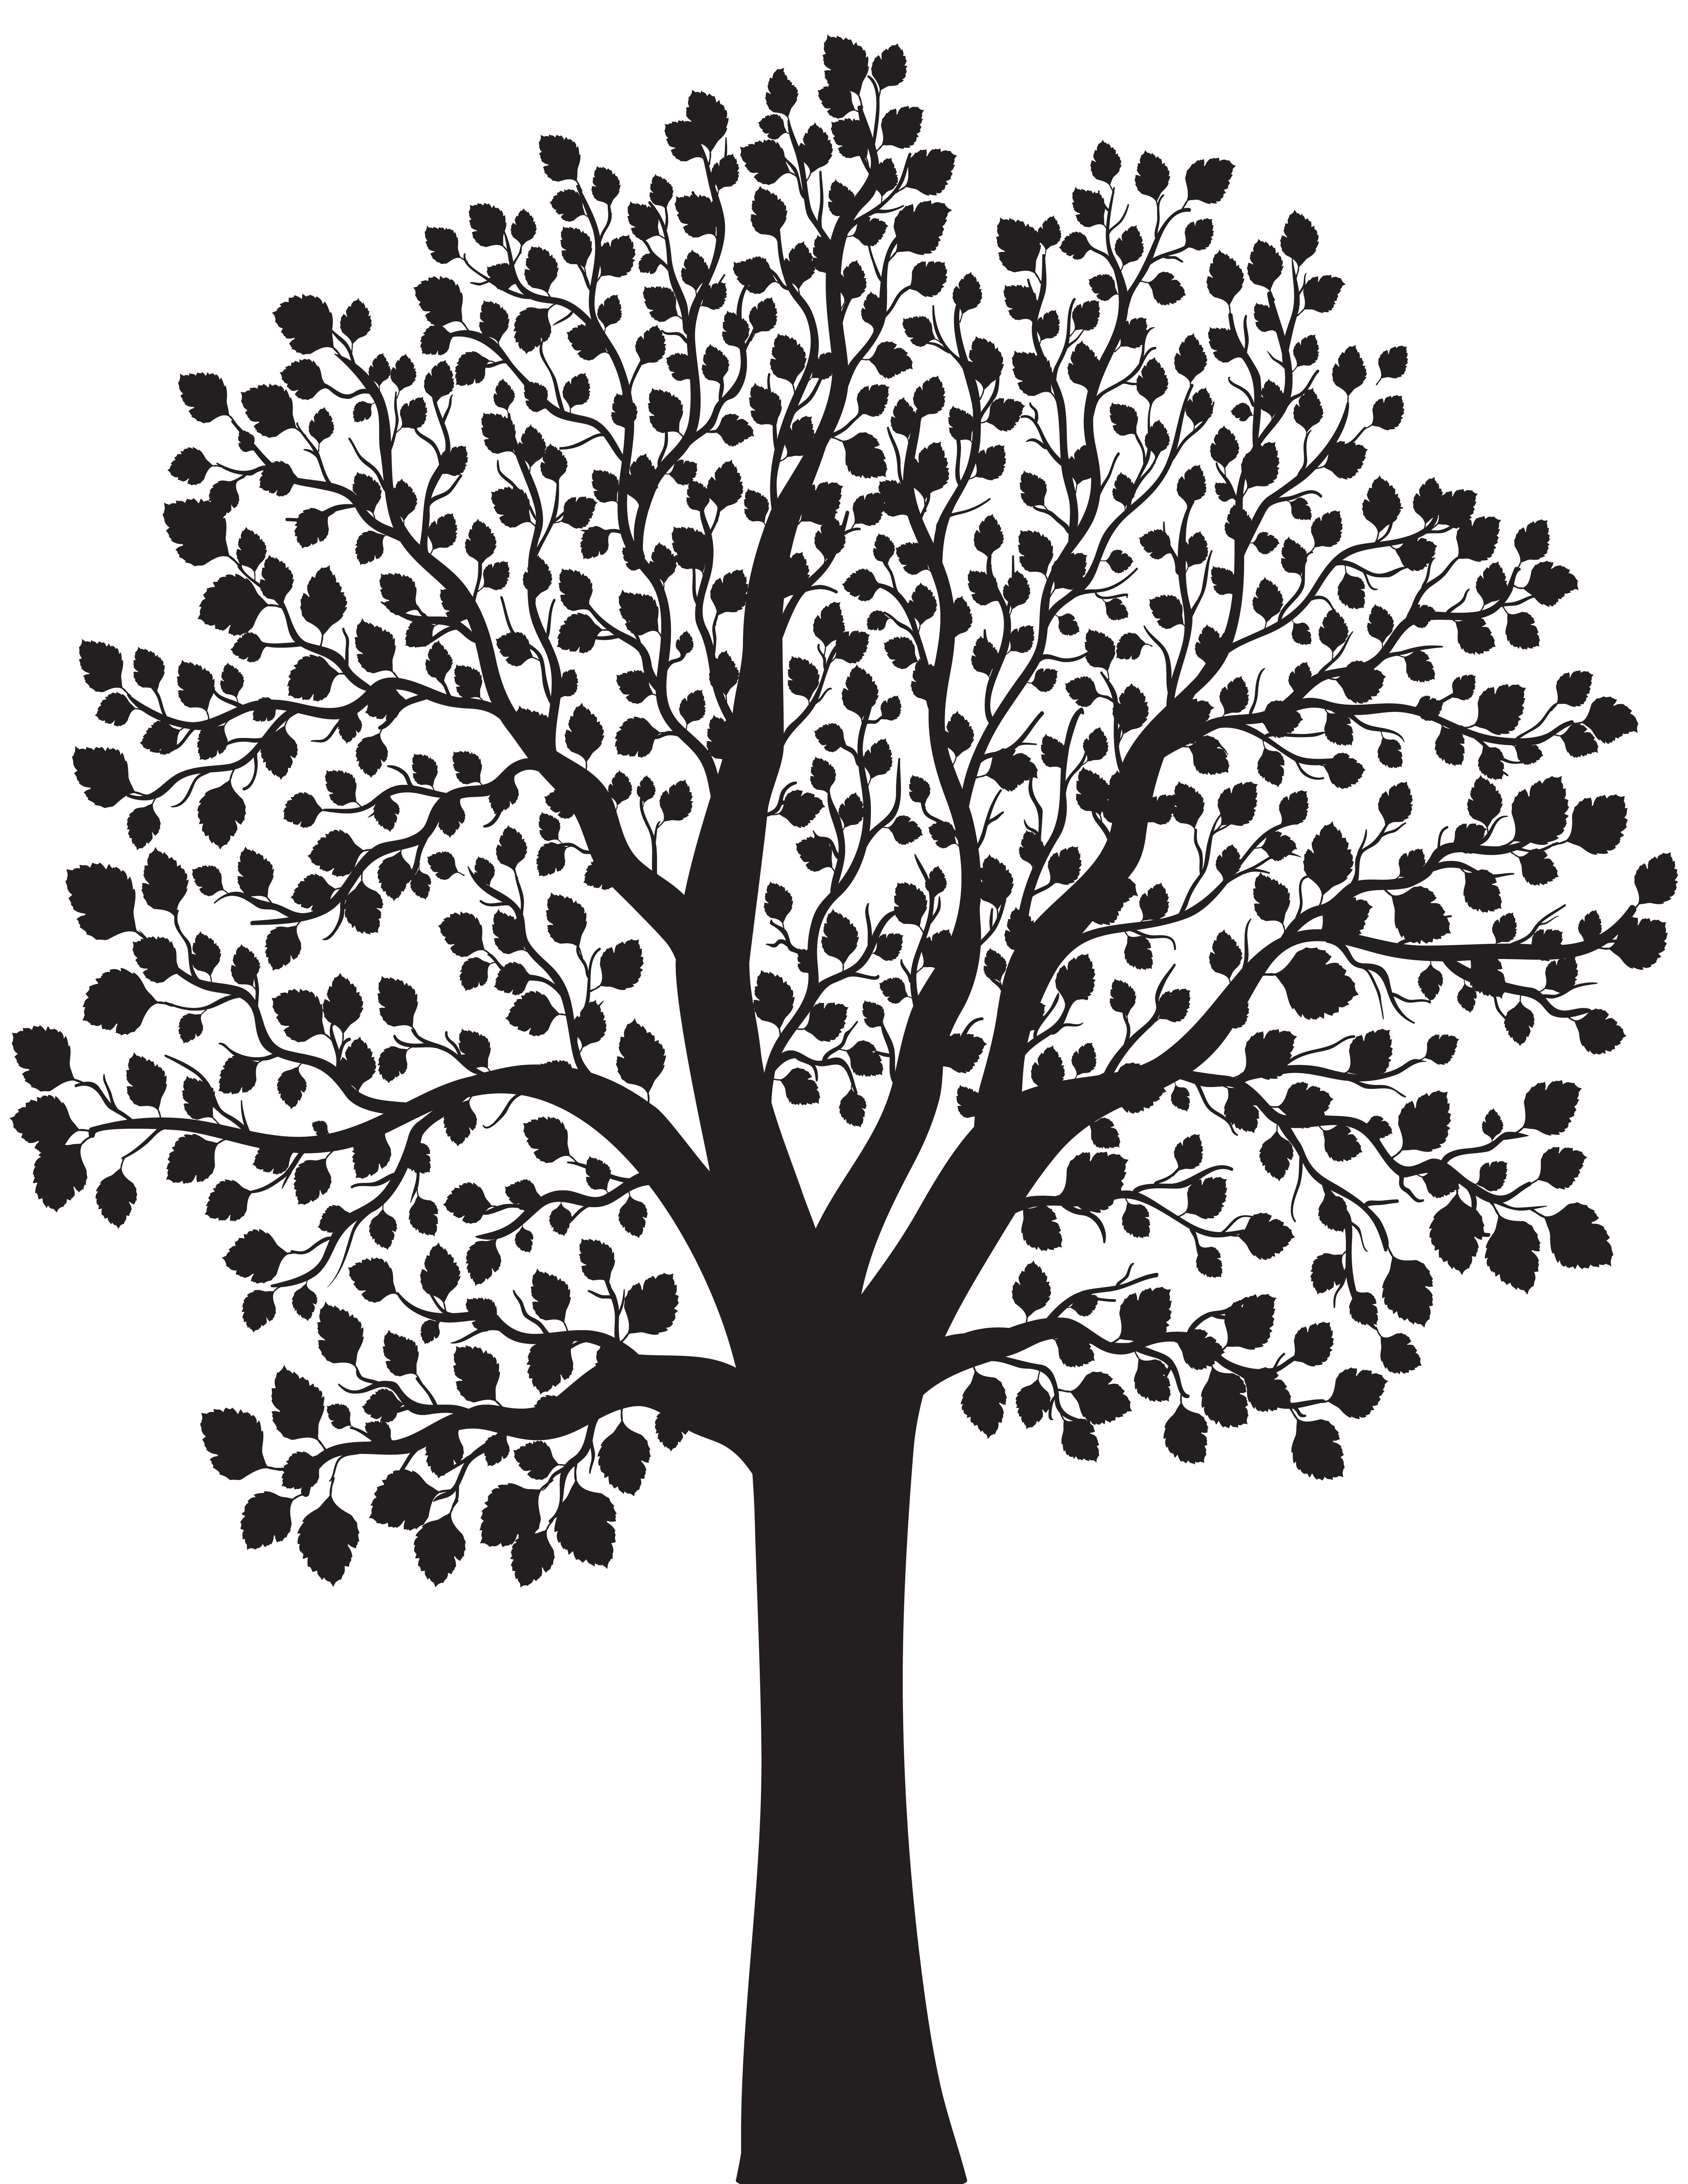 Black Tree Silhouette Clipart In Vector Tree Clipart Tree Silhouette ...